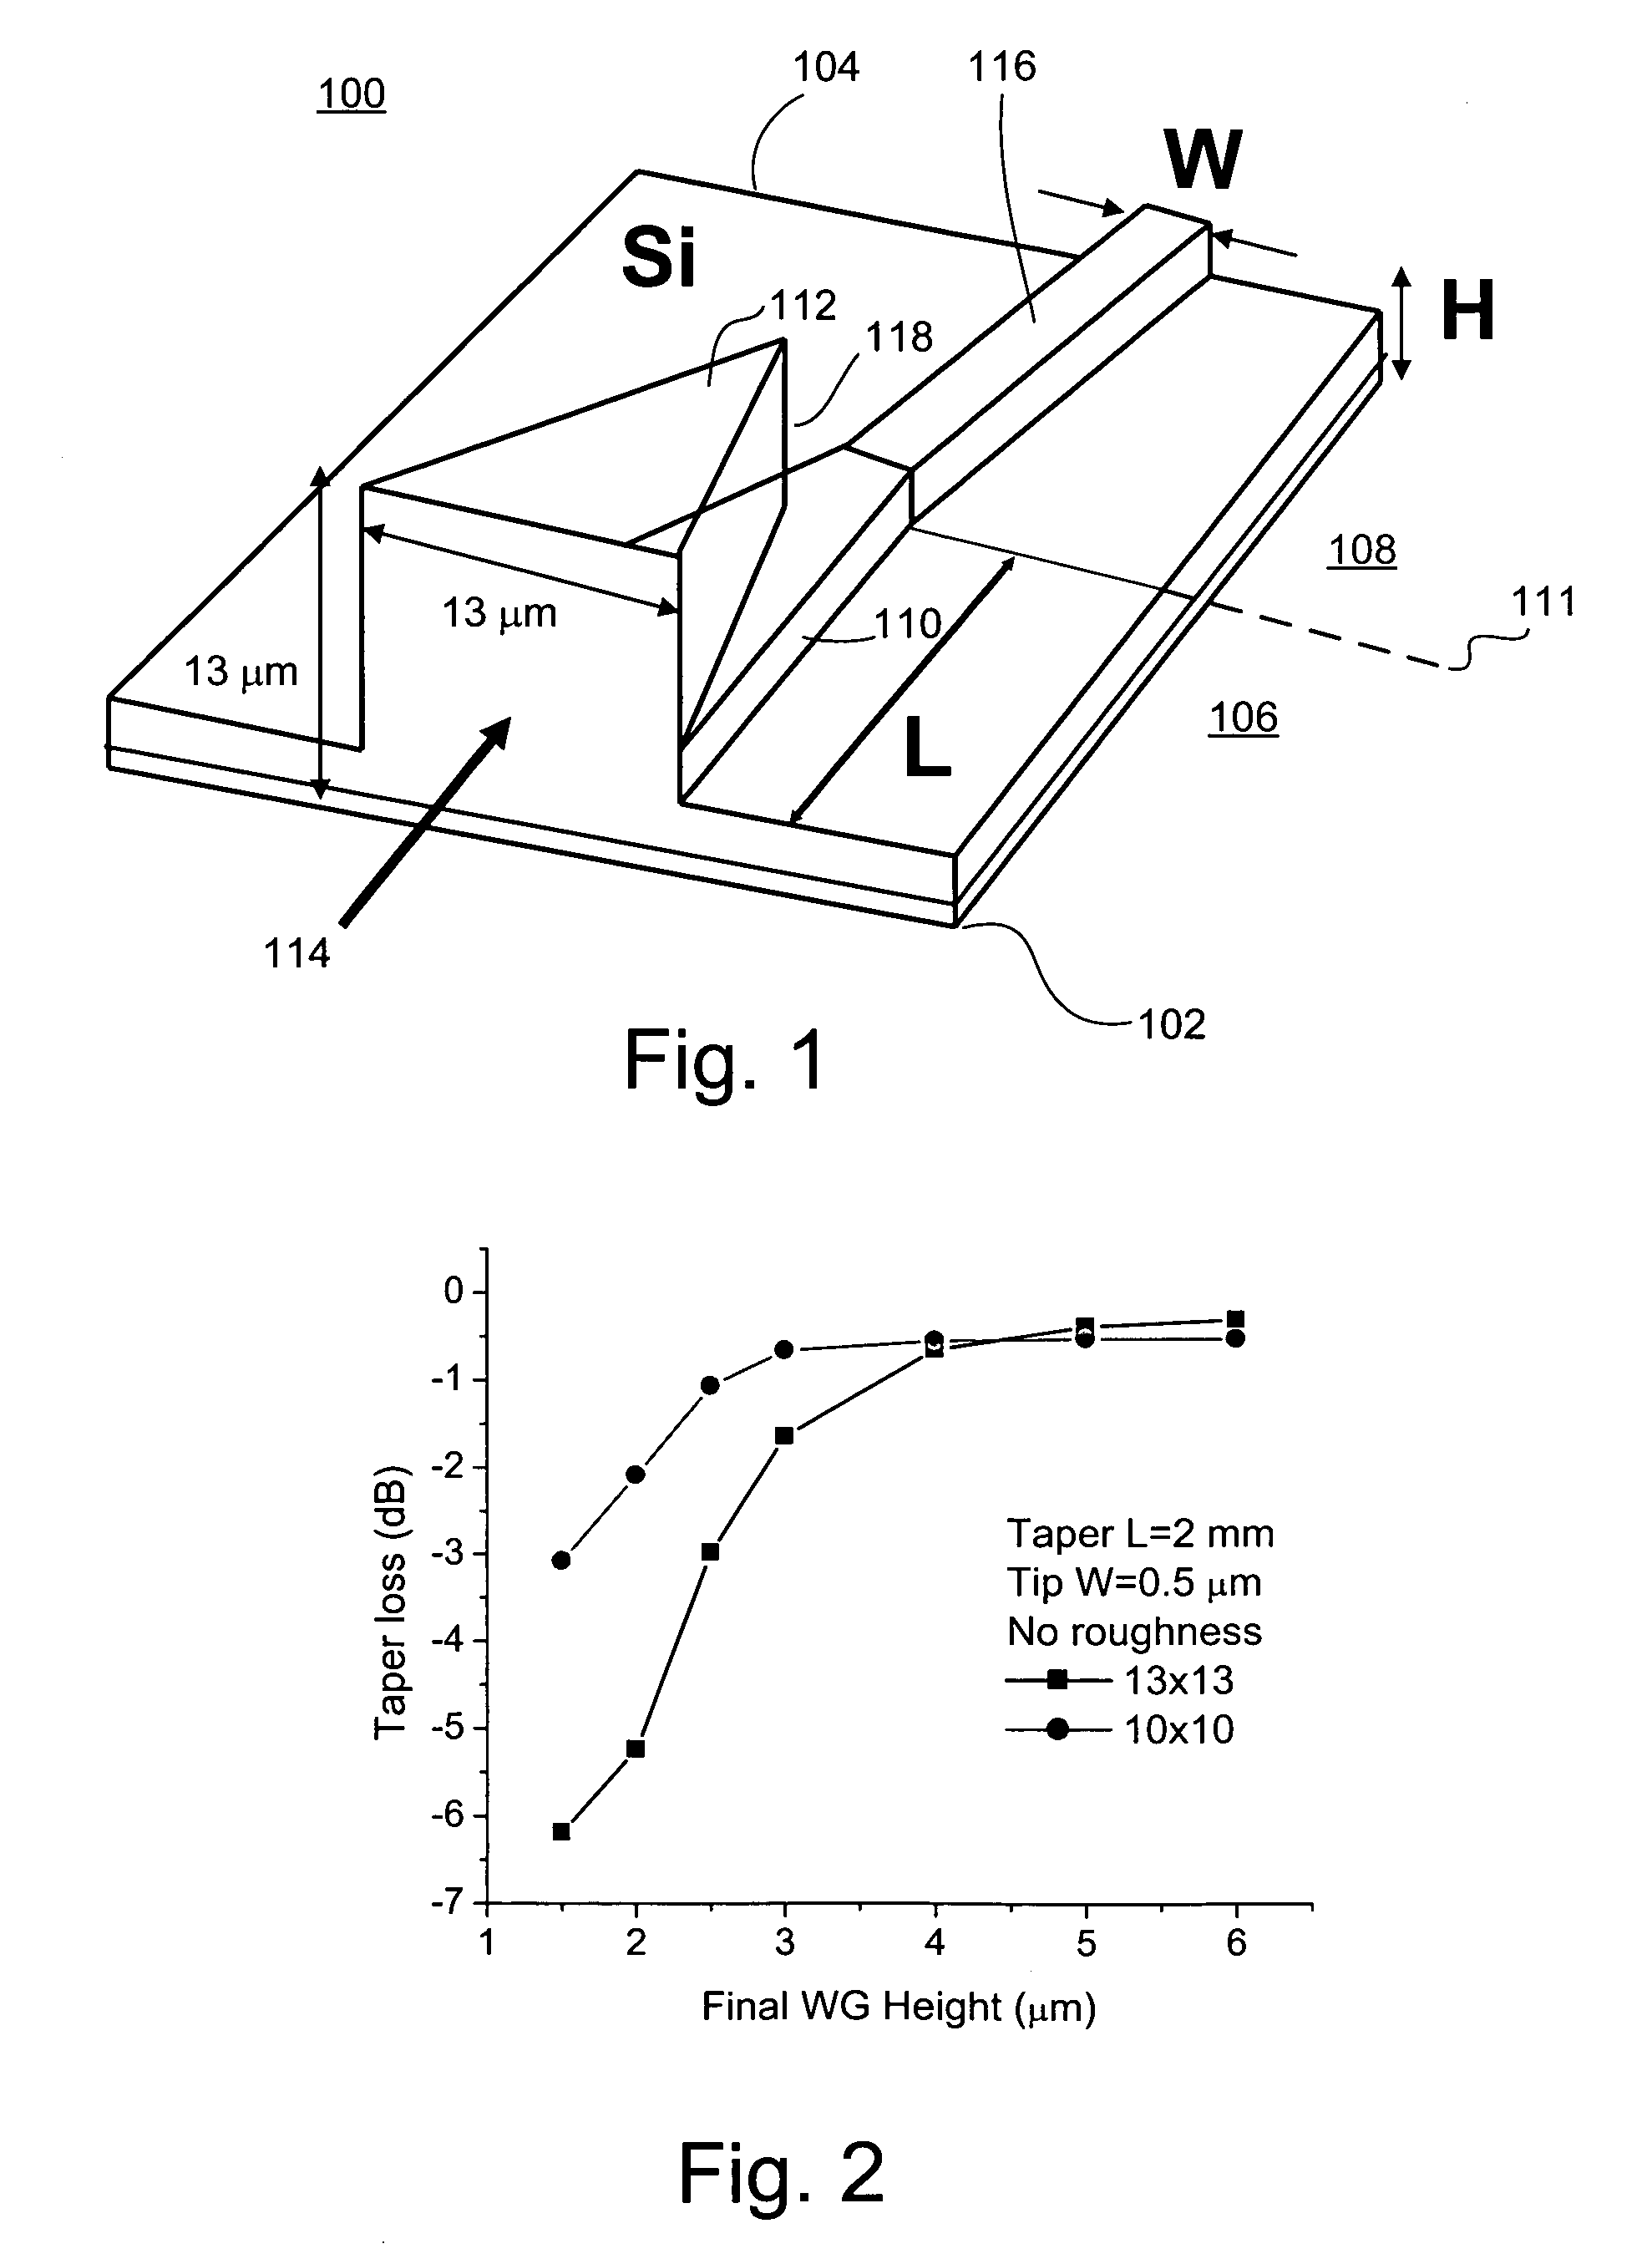 Dual “cheese wedge” silicon taper waveguide